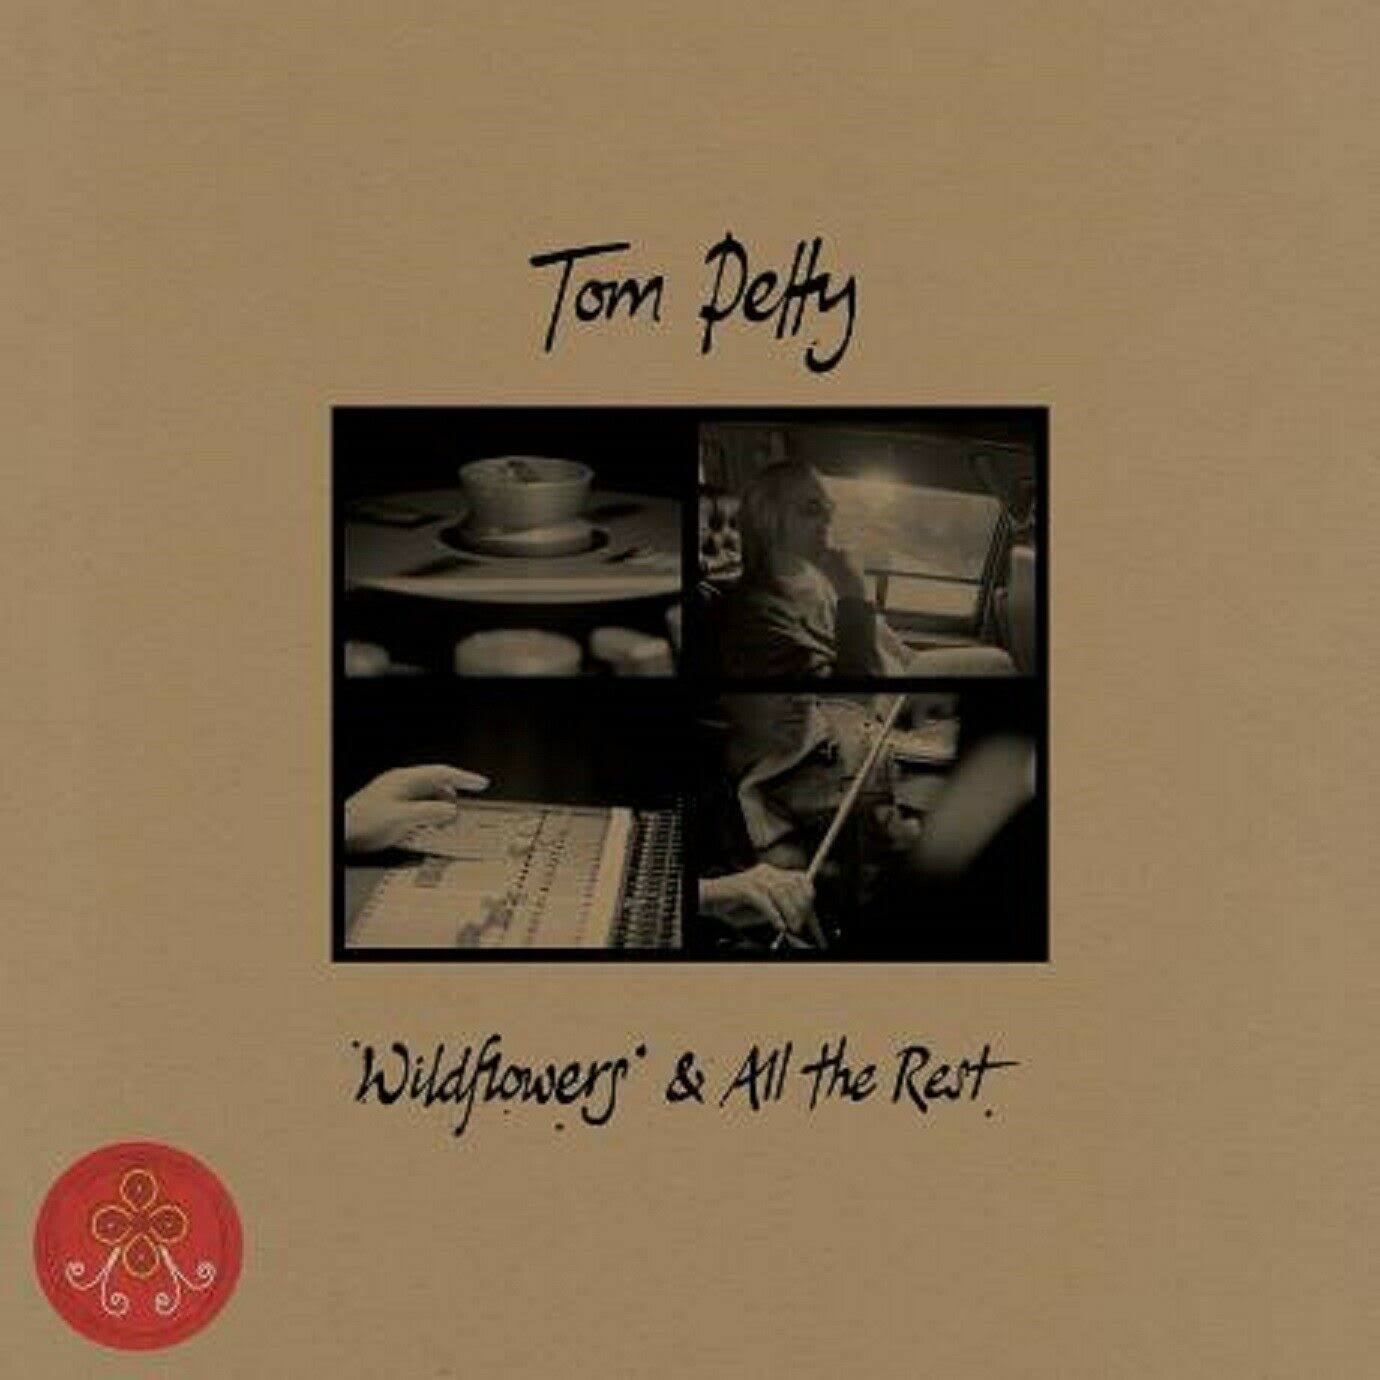 Wildflowers & All The Rest - Tom Petty - vinyl